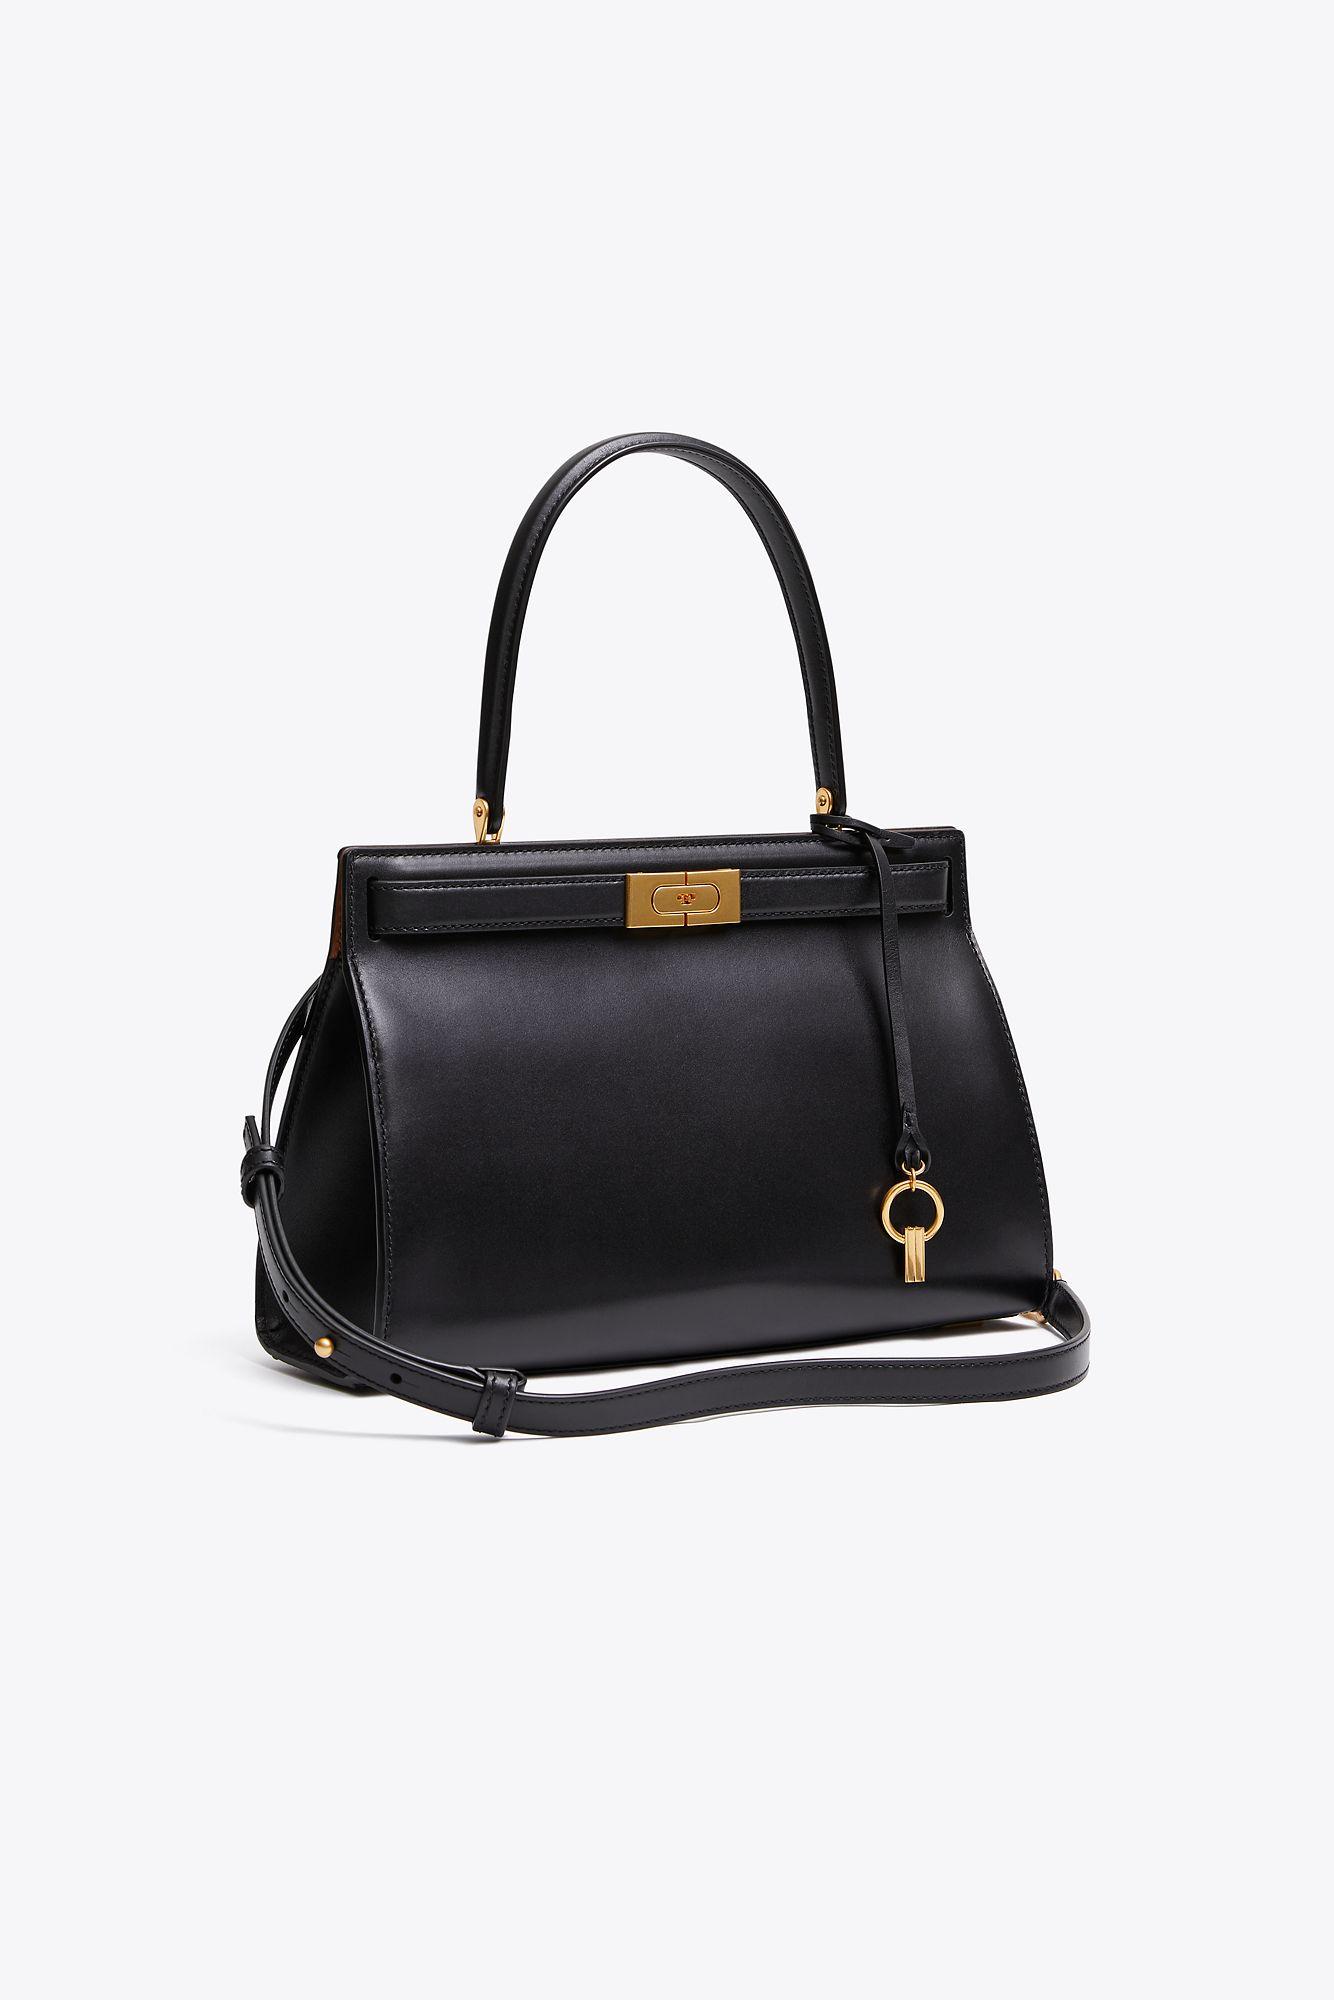 Tory Burch Leather Lee Radziwill Small Bag in Black/Gold (Black) - Lyst